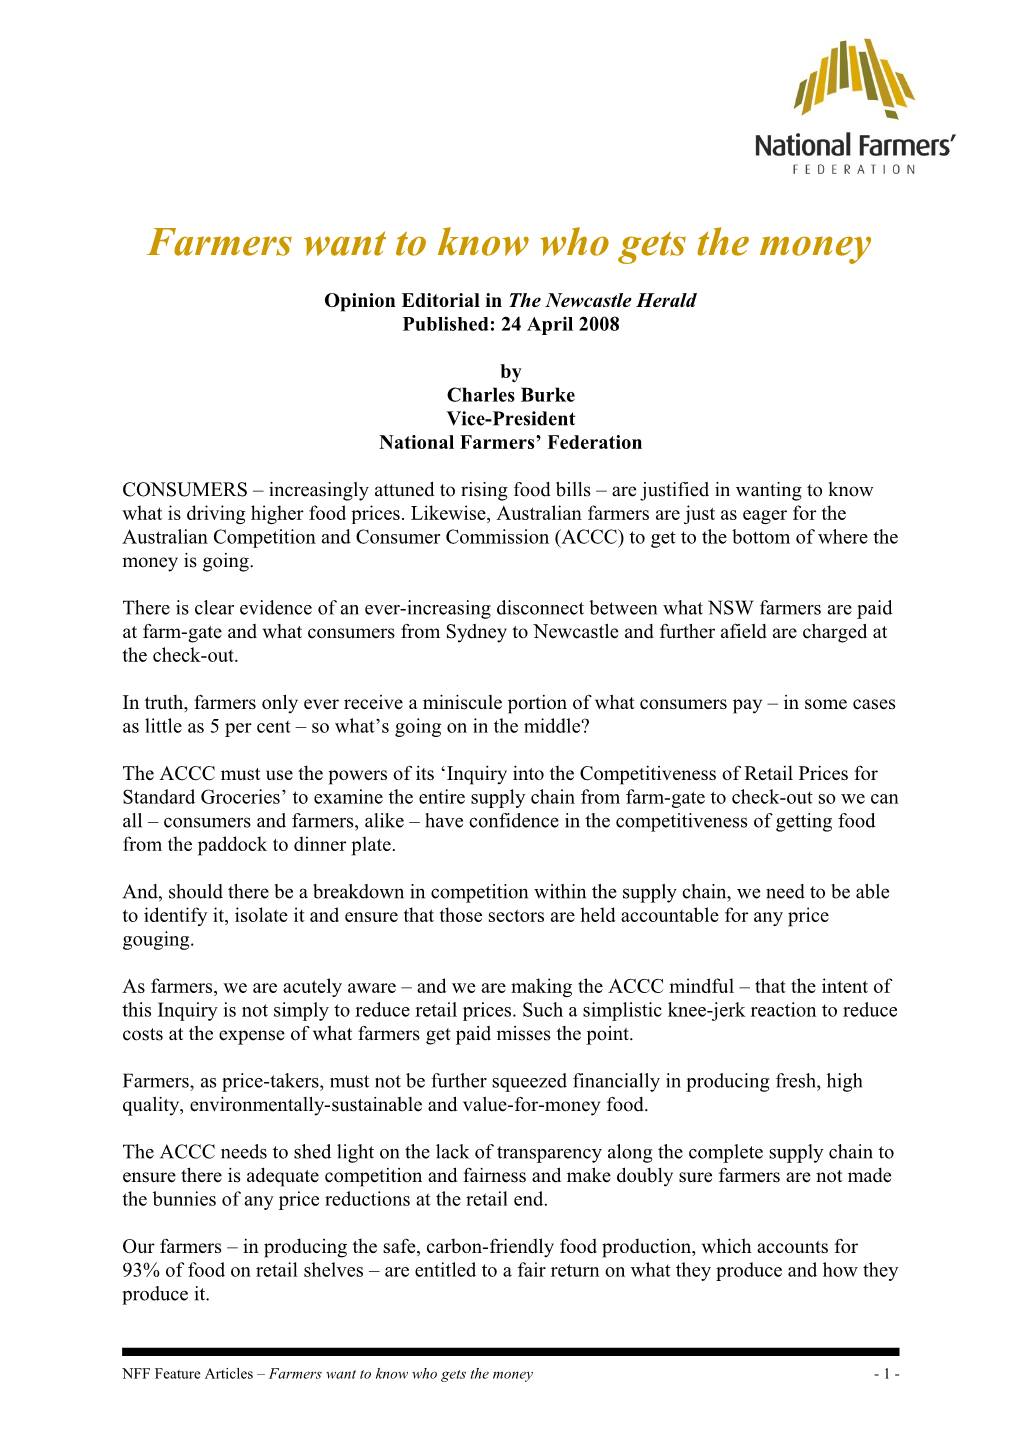 Farmers Want to Know Who Gets the Money